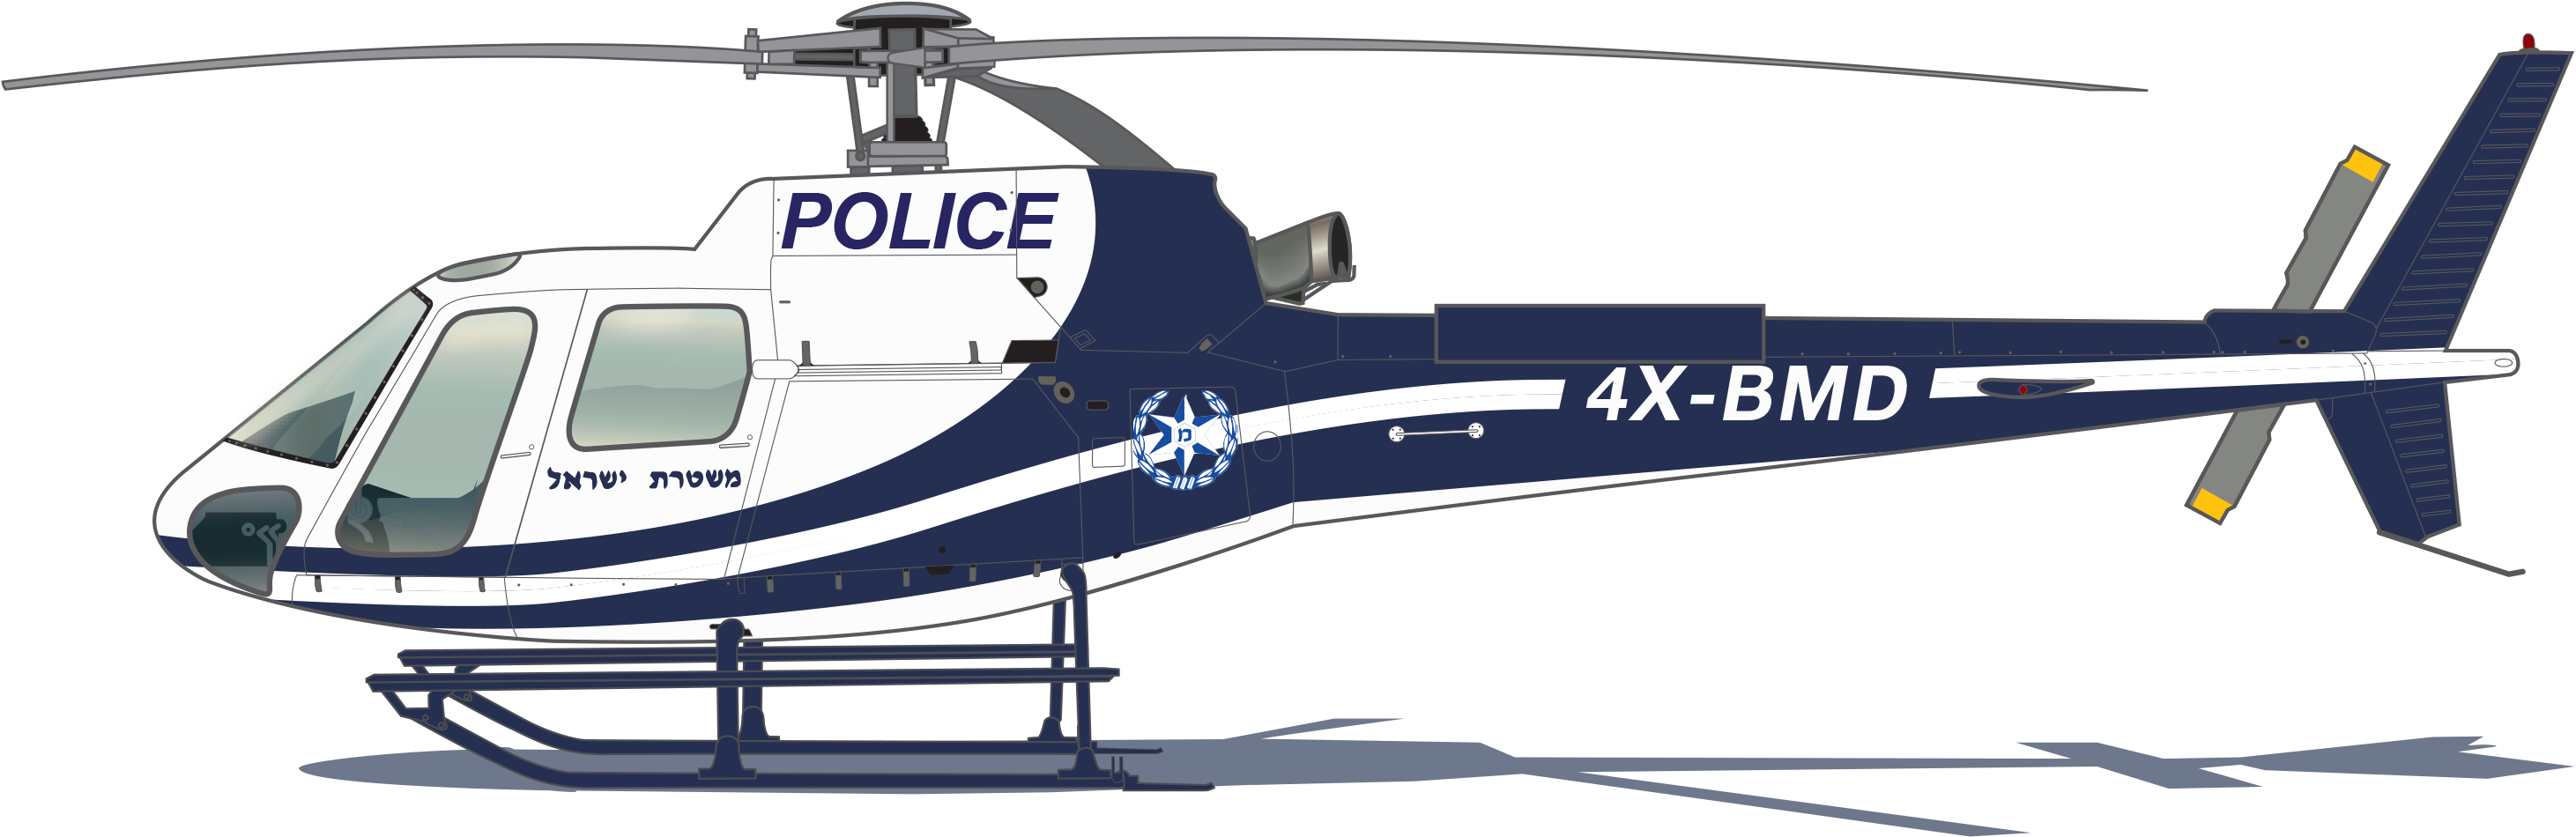 Police Helicopter Cartoon Png - img-fuzz